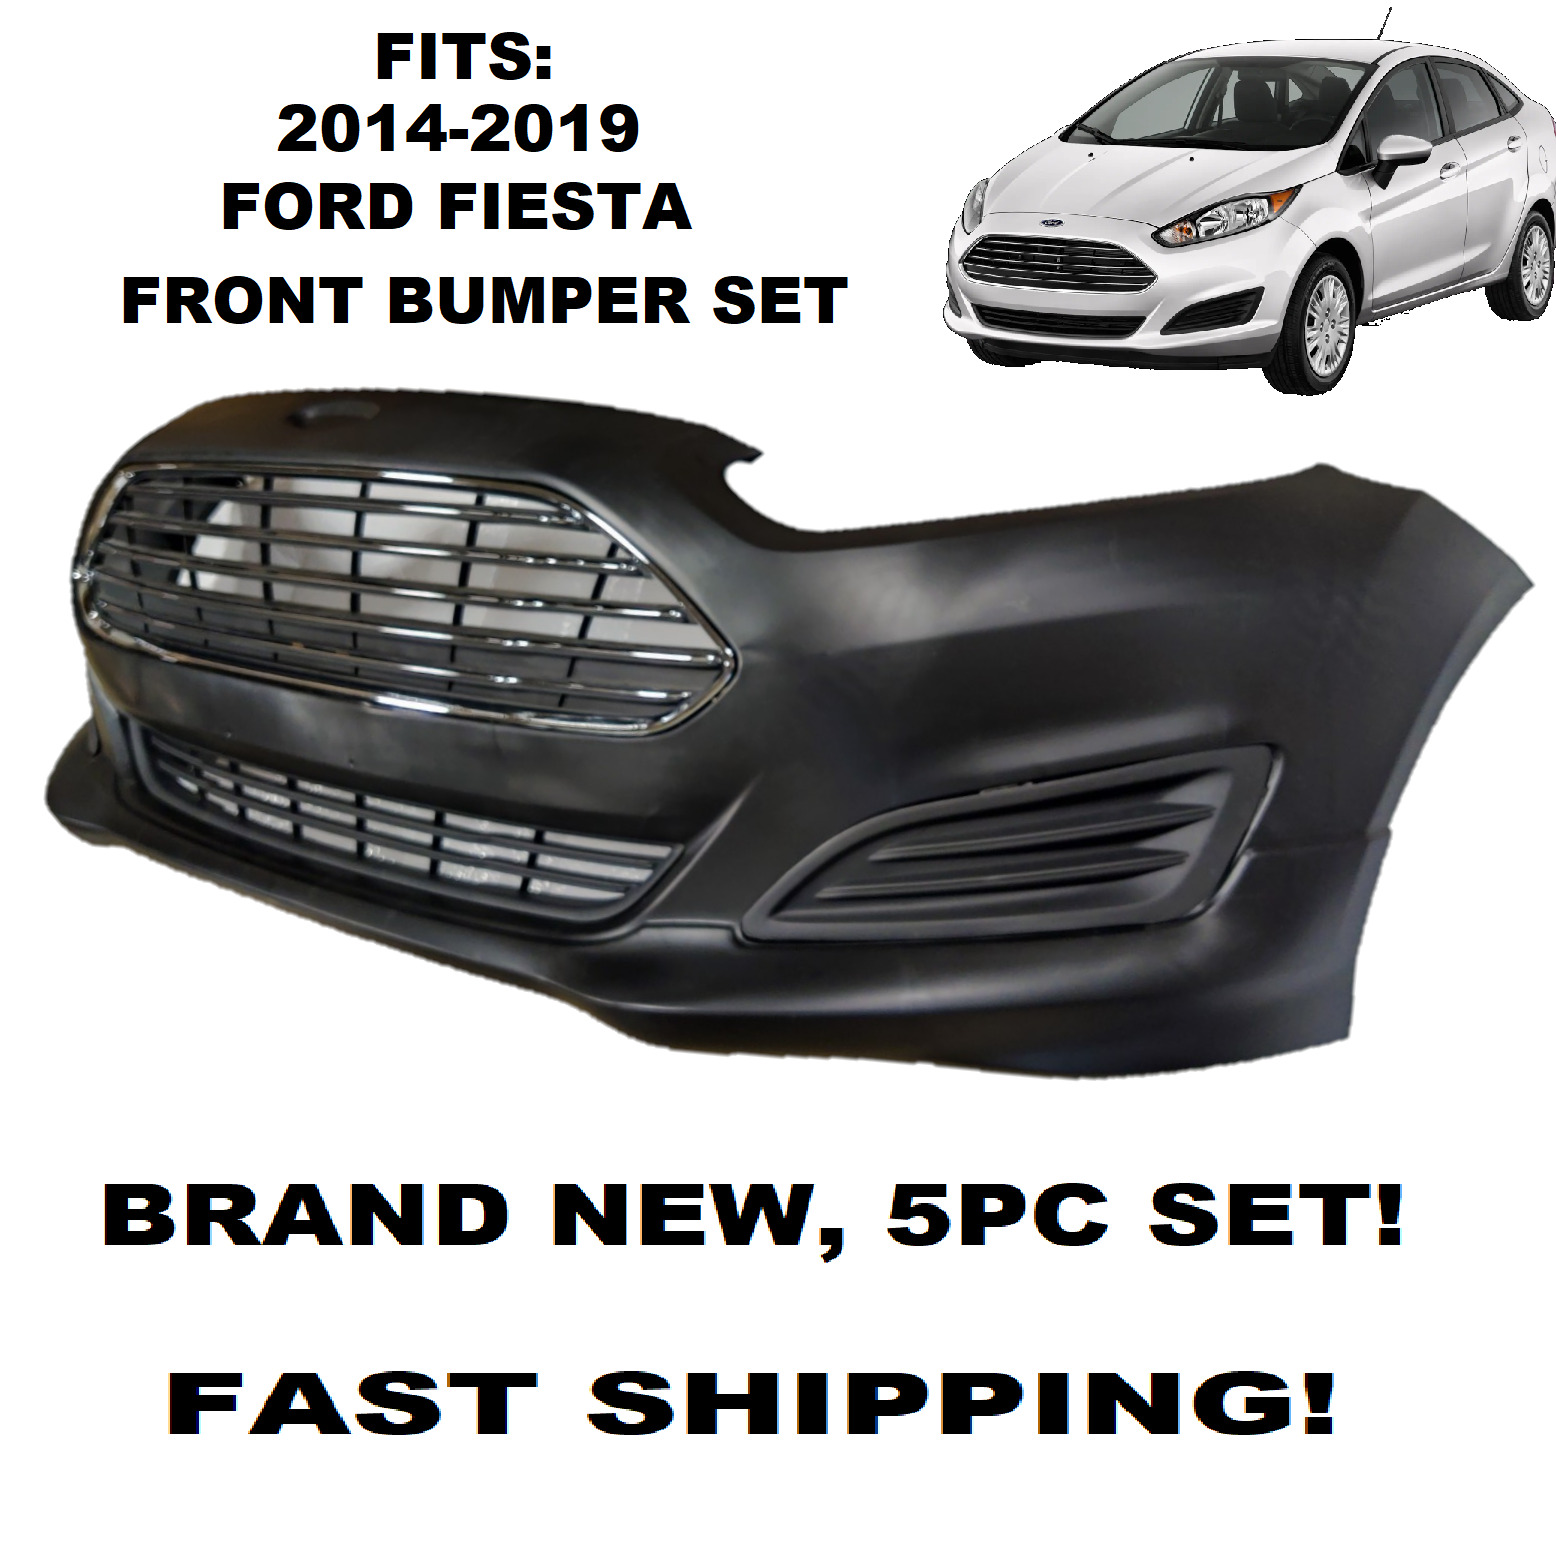 FITS 2014 2015 2016 2017 2018 2019 FORD FIESTA FRONT BUMPER COVER set 